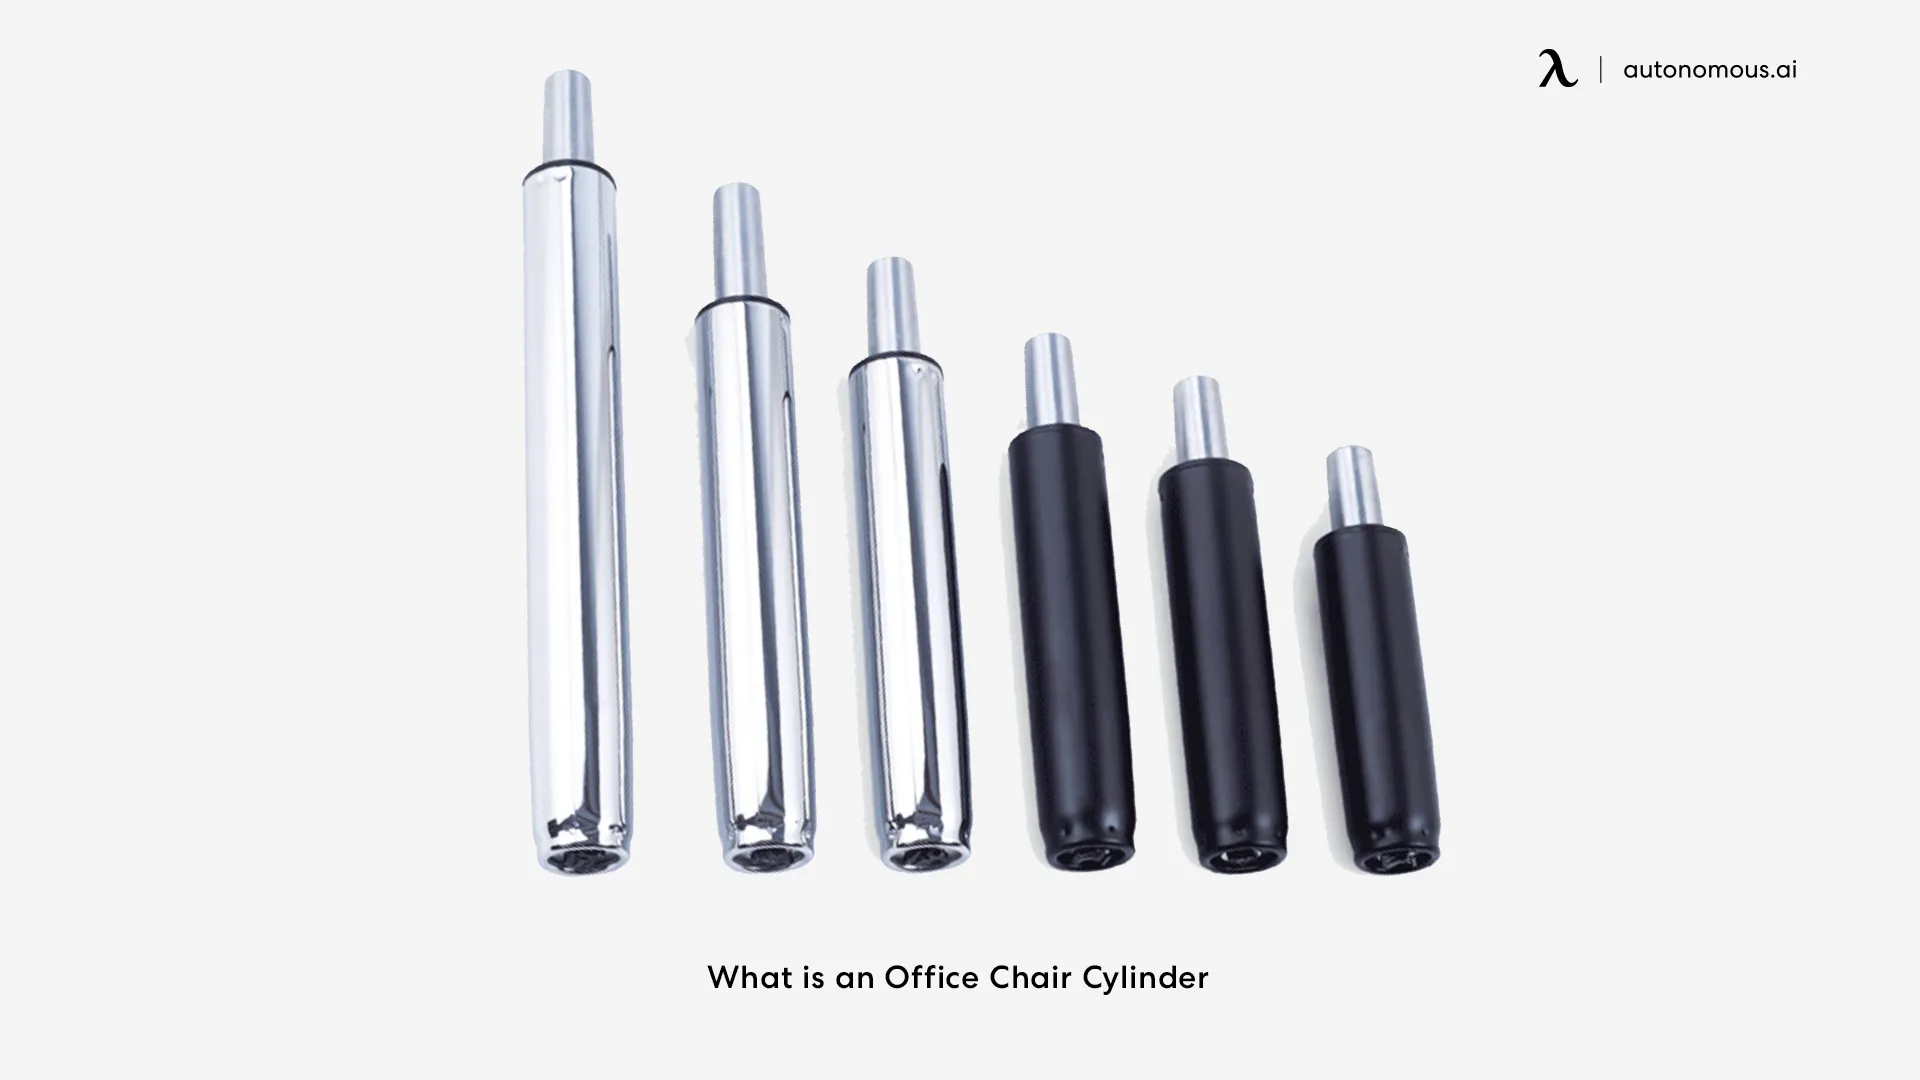 What is an Office Chair Cylinder?